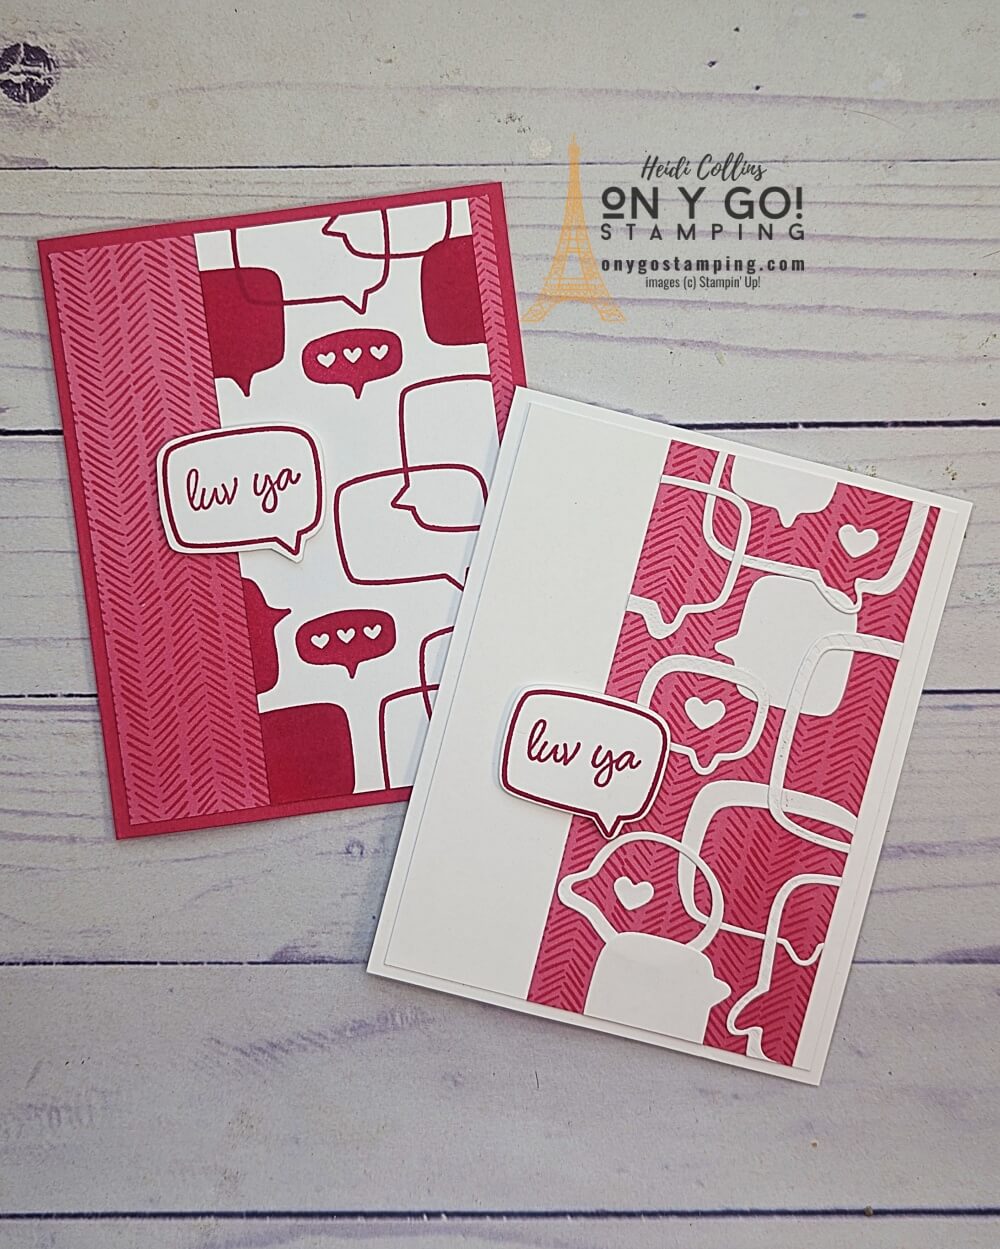 Handmade Valentine's Day cards with the Conversation Bubbles stamp set and Enjoy the Journey patterned paper from Stampin' Up!®